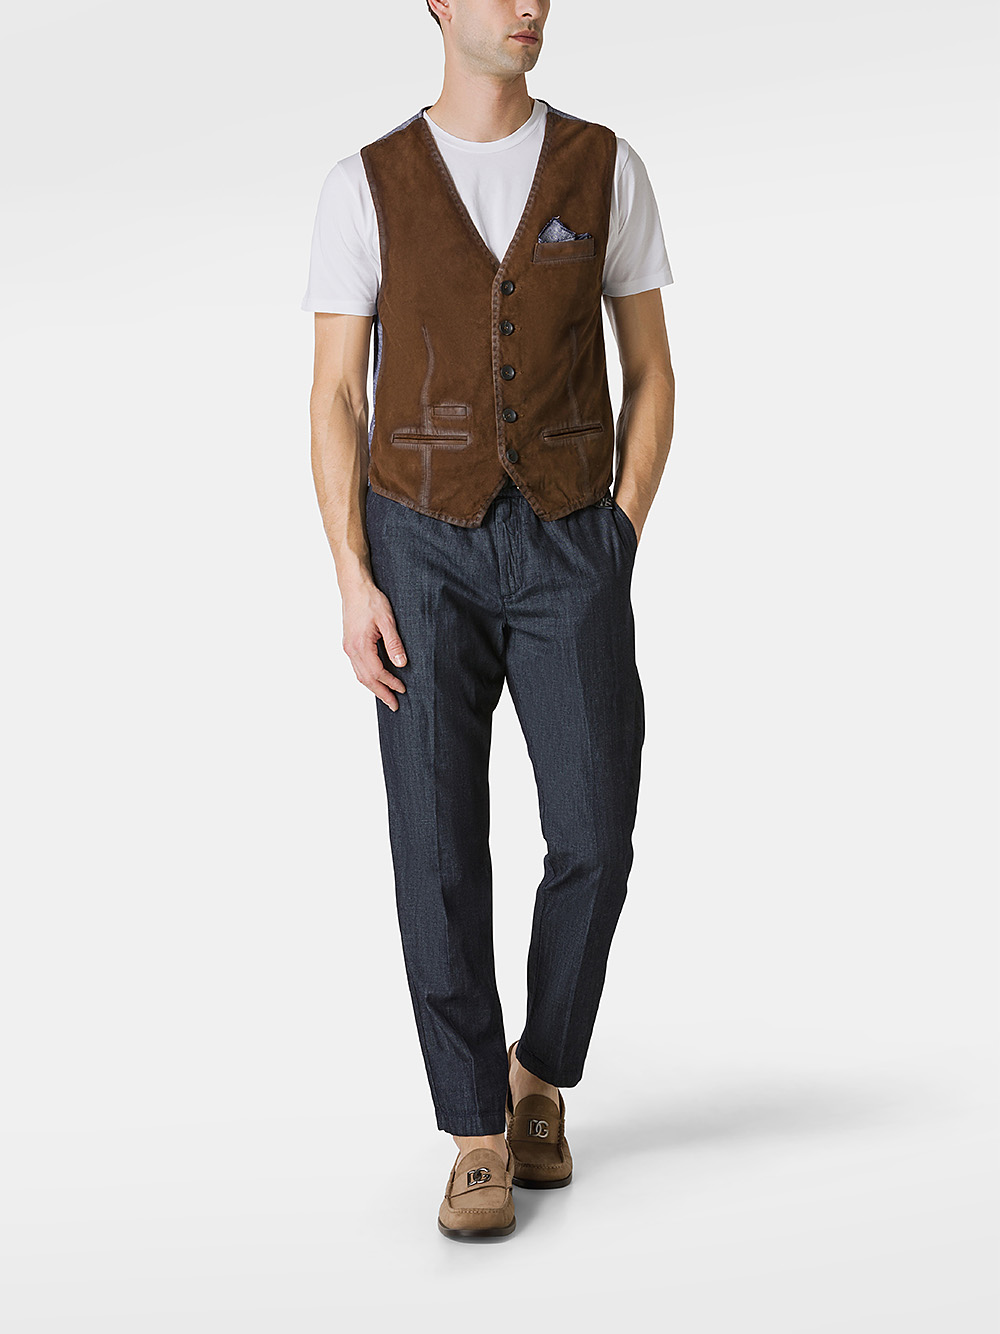 Suede and cotton vest with pocket square